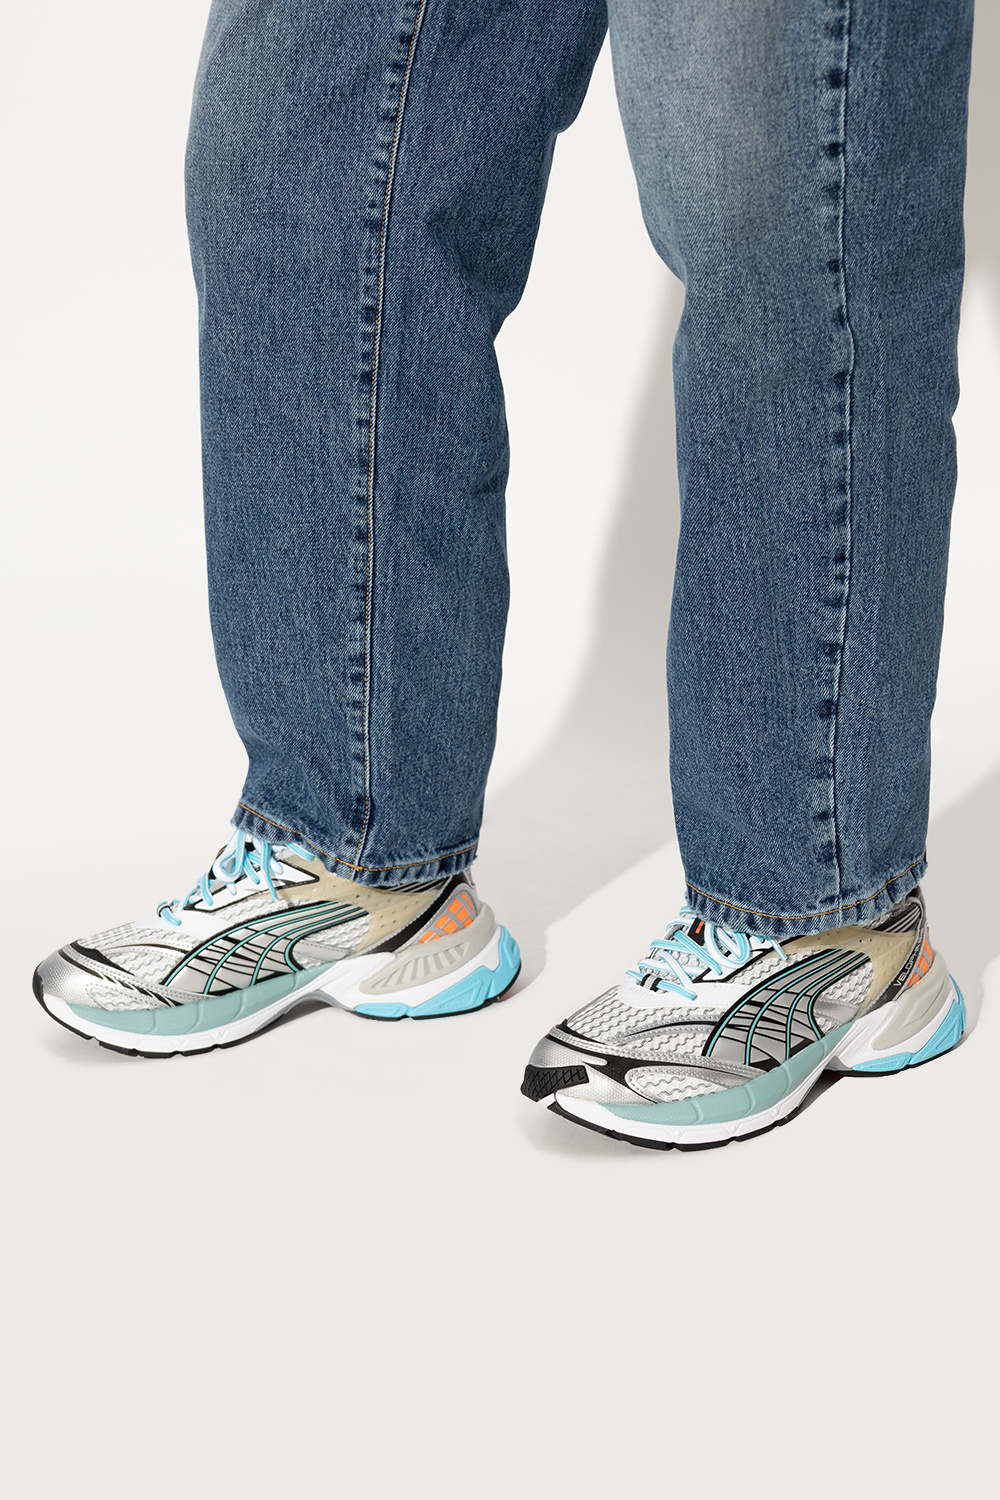 Puma 'Velophasis Phased' sneakers | Women's Shoes | Vitkac